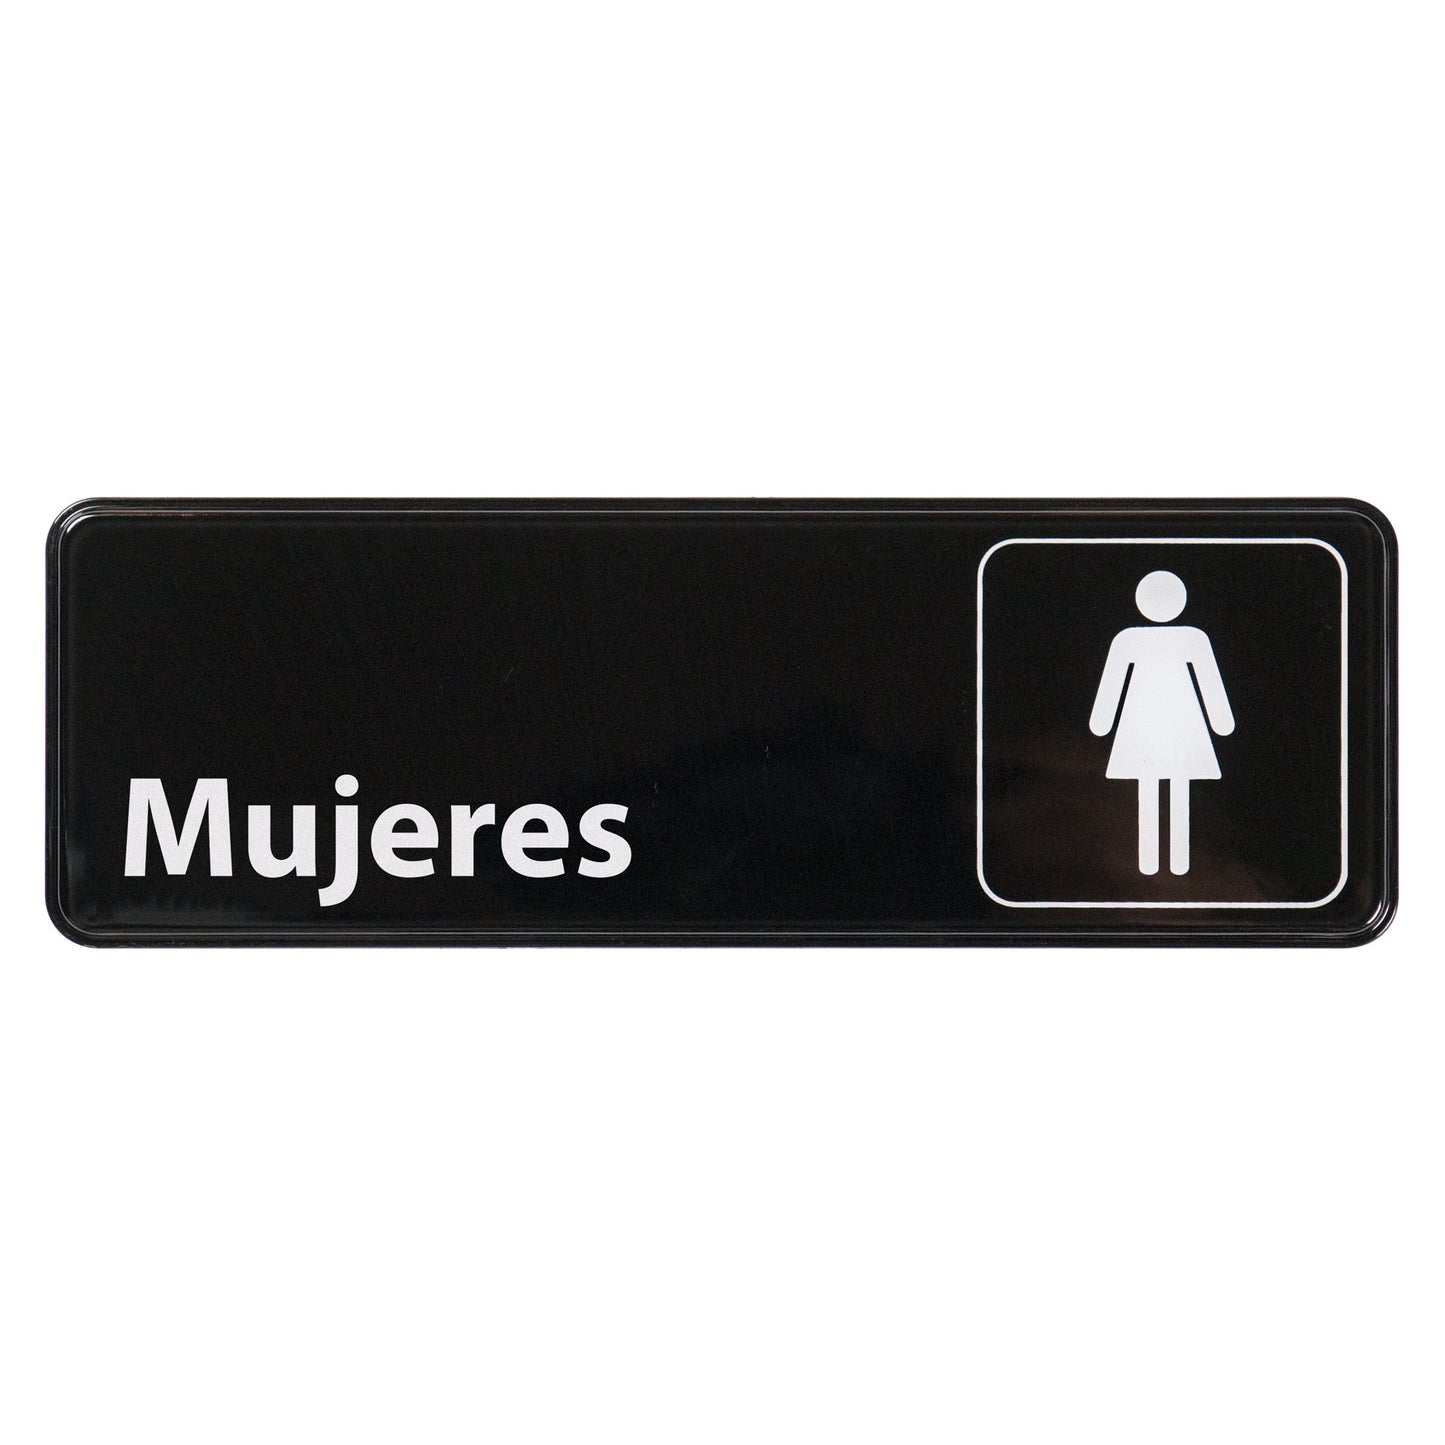 SGN-369 - Information Signs, 9"W x 3"H, Spanish - SGN-369 - Women